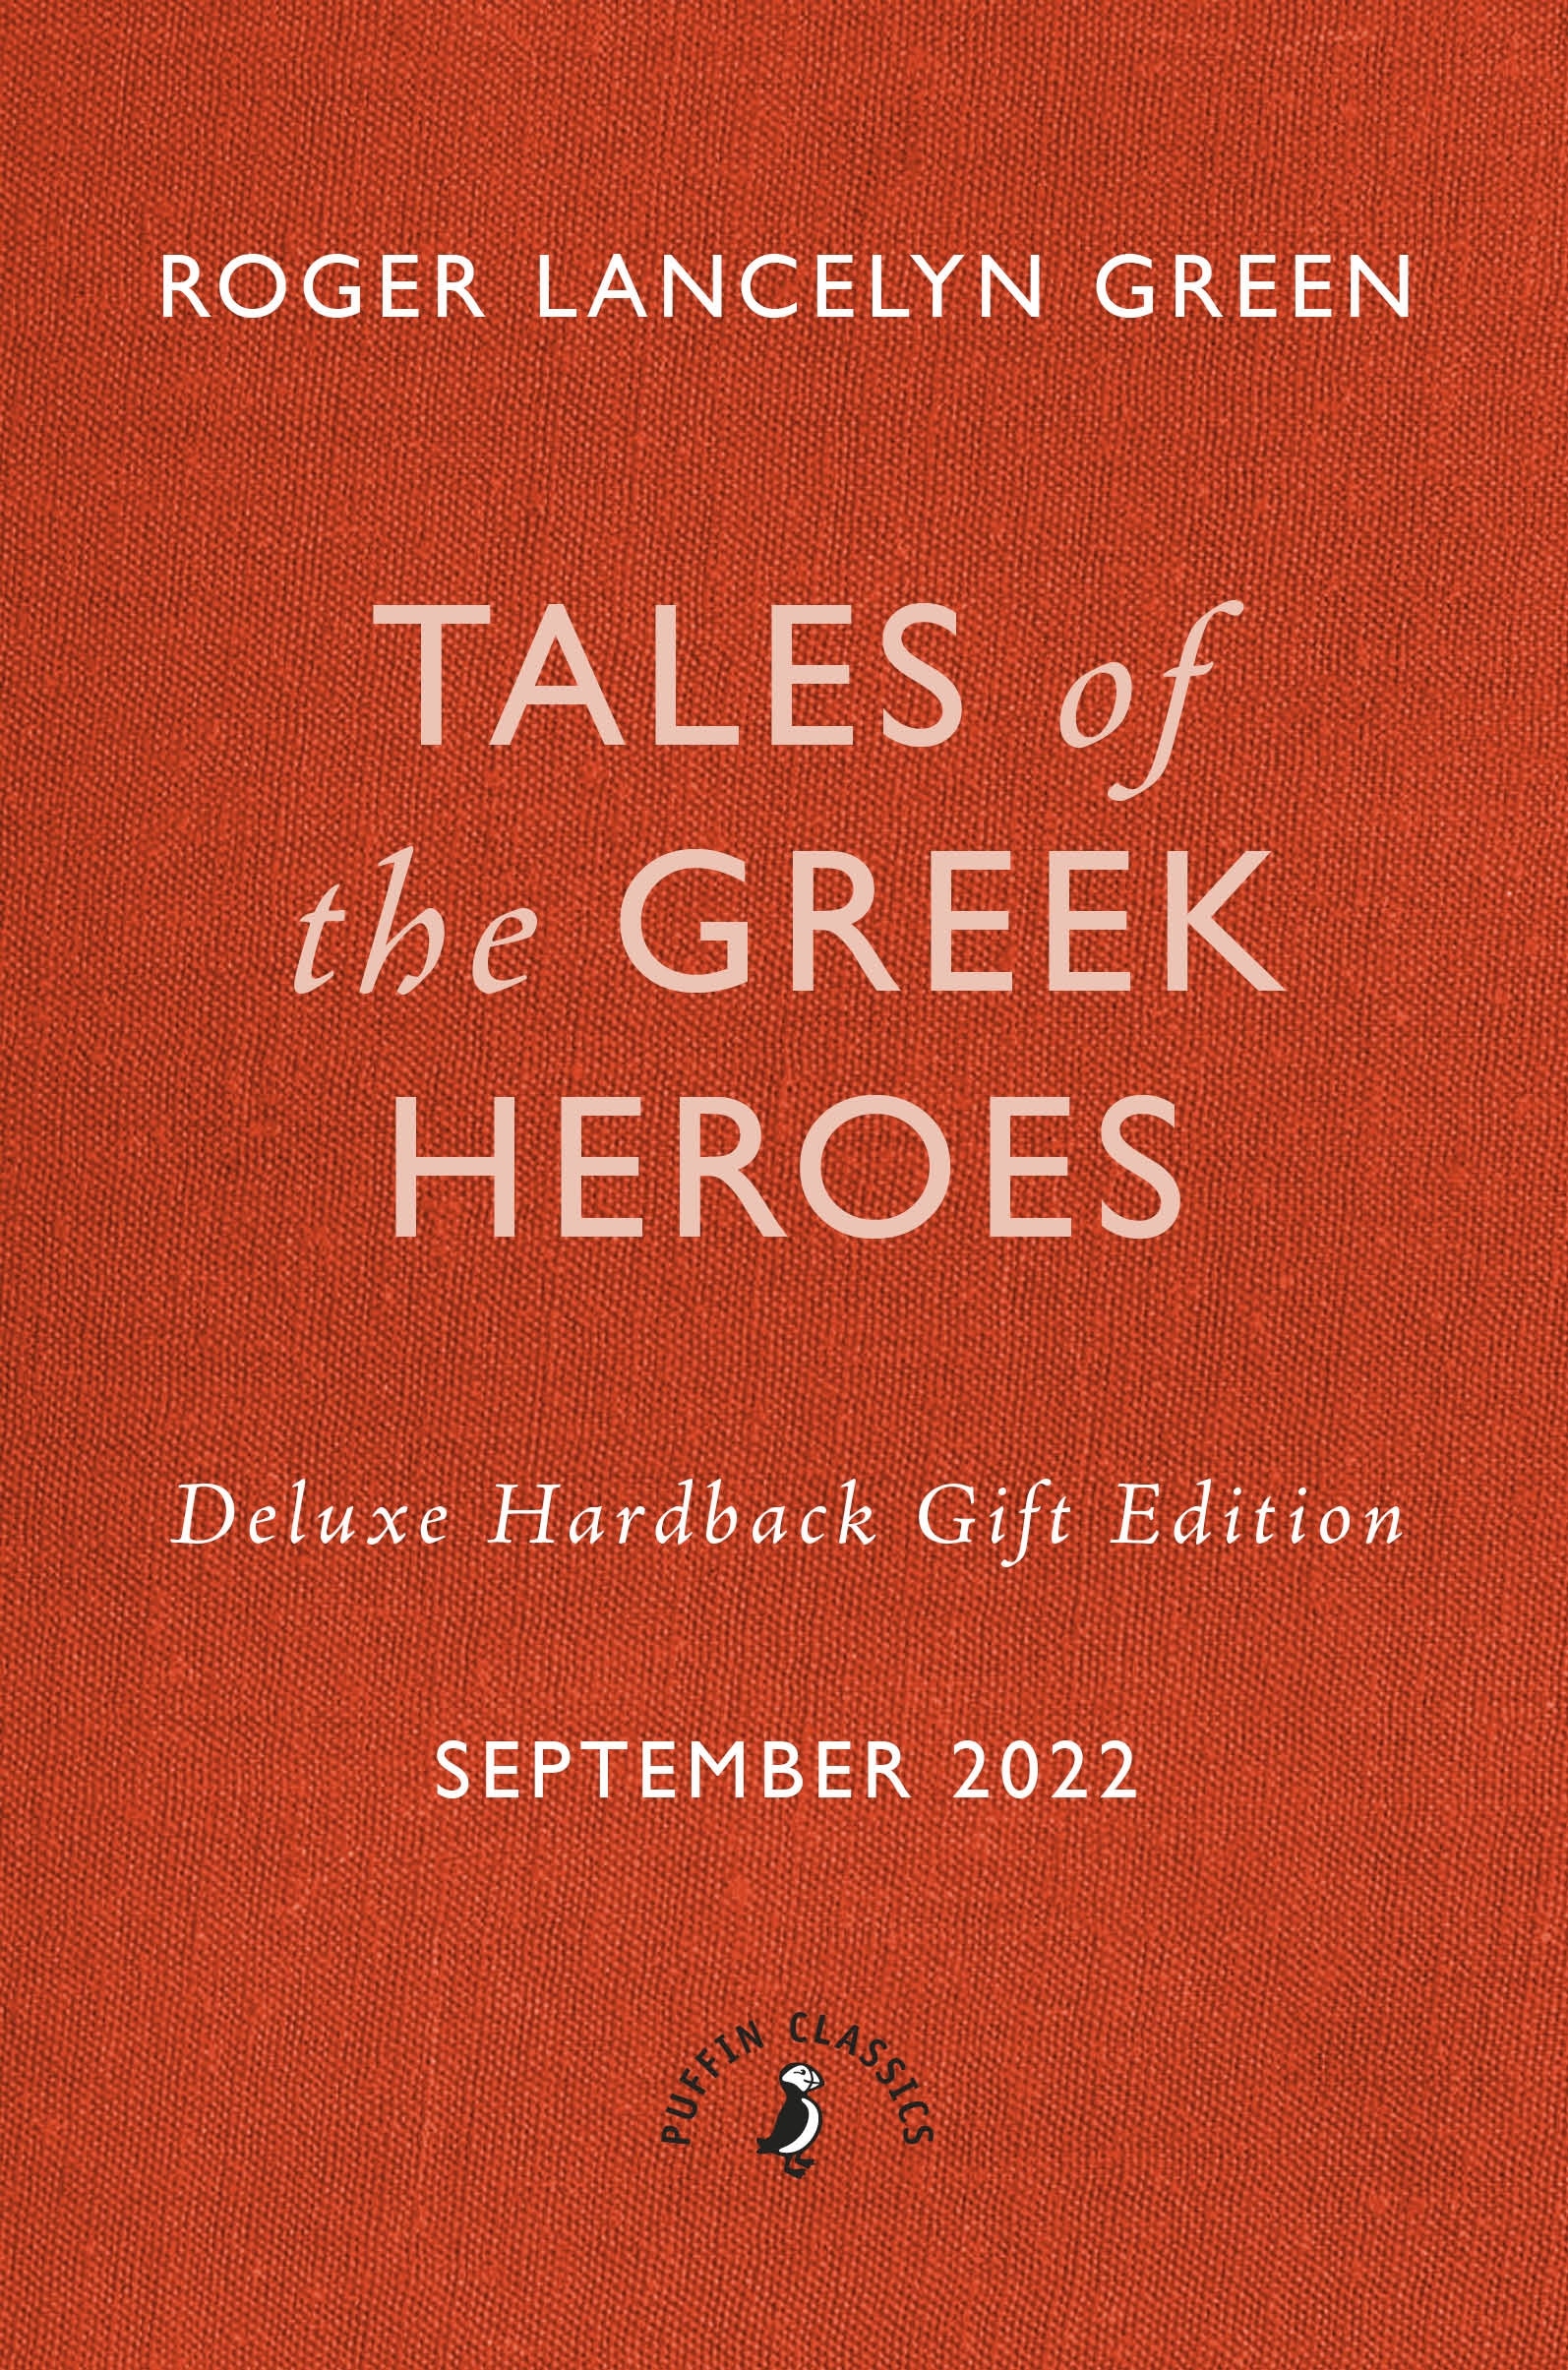 Book “Tales of the Greek Heroes” by Roger Lancelyn Green — September 1, 2022